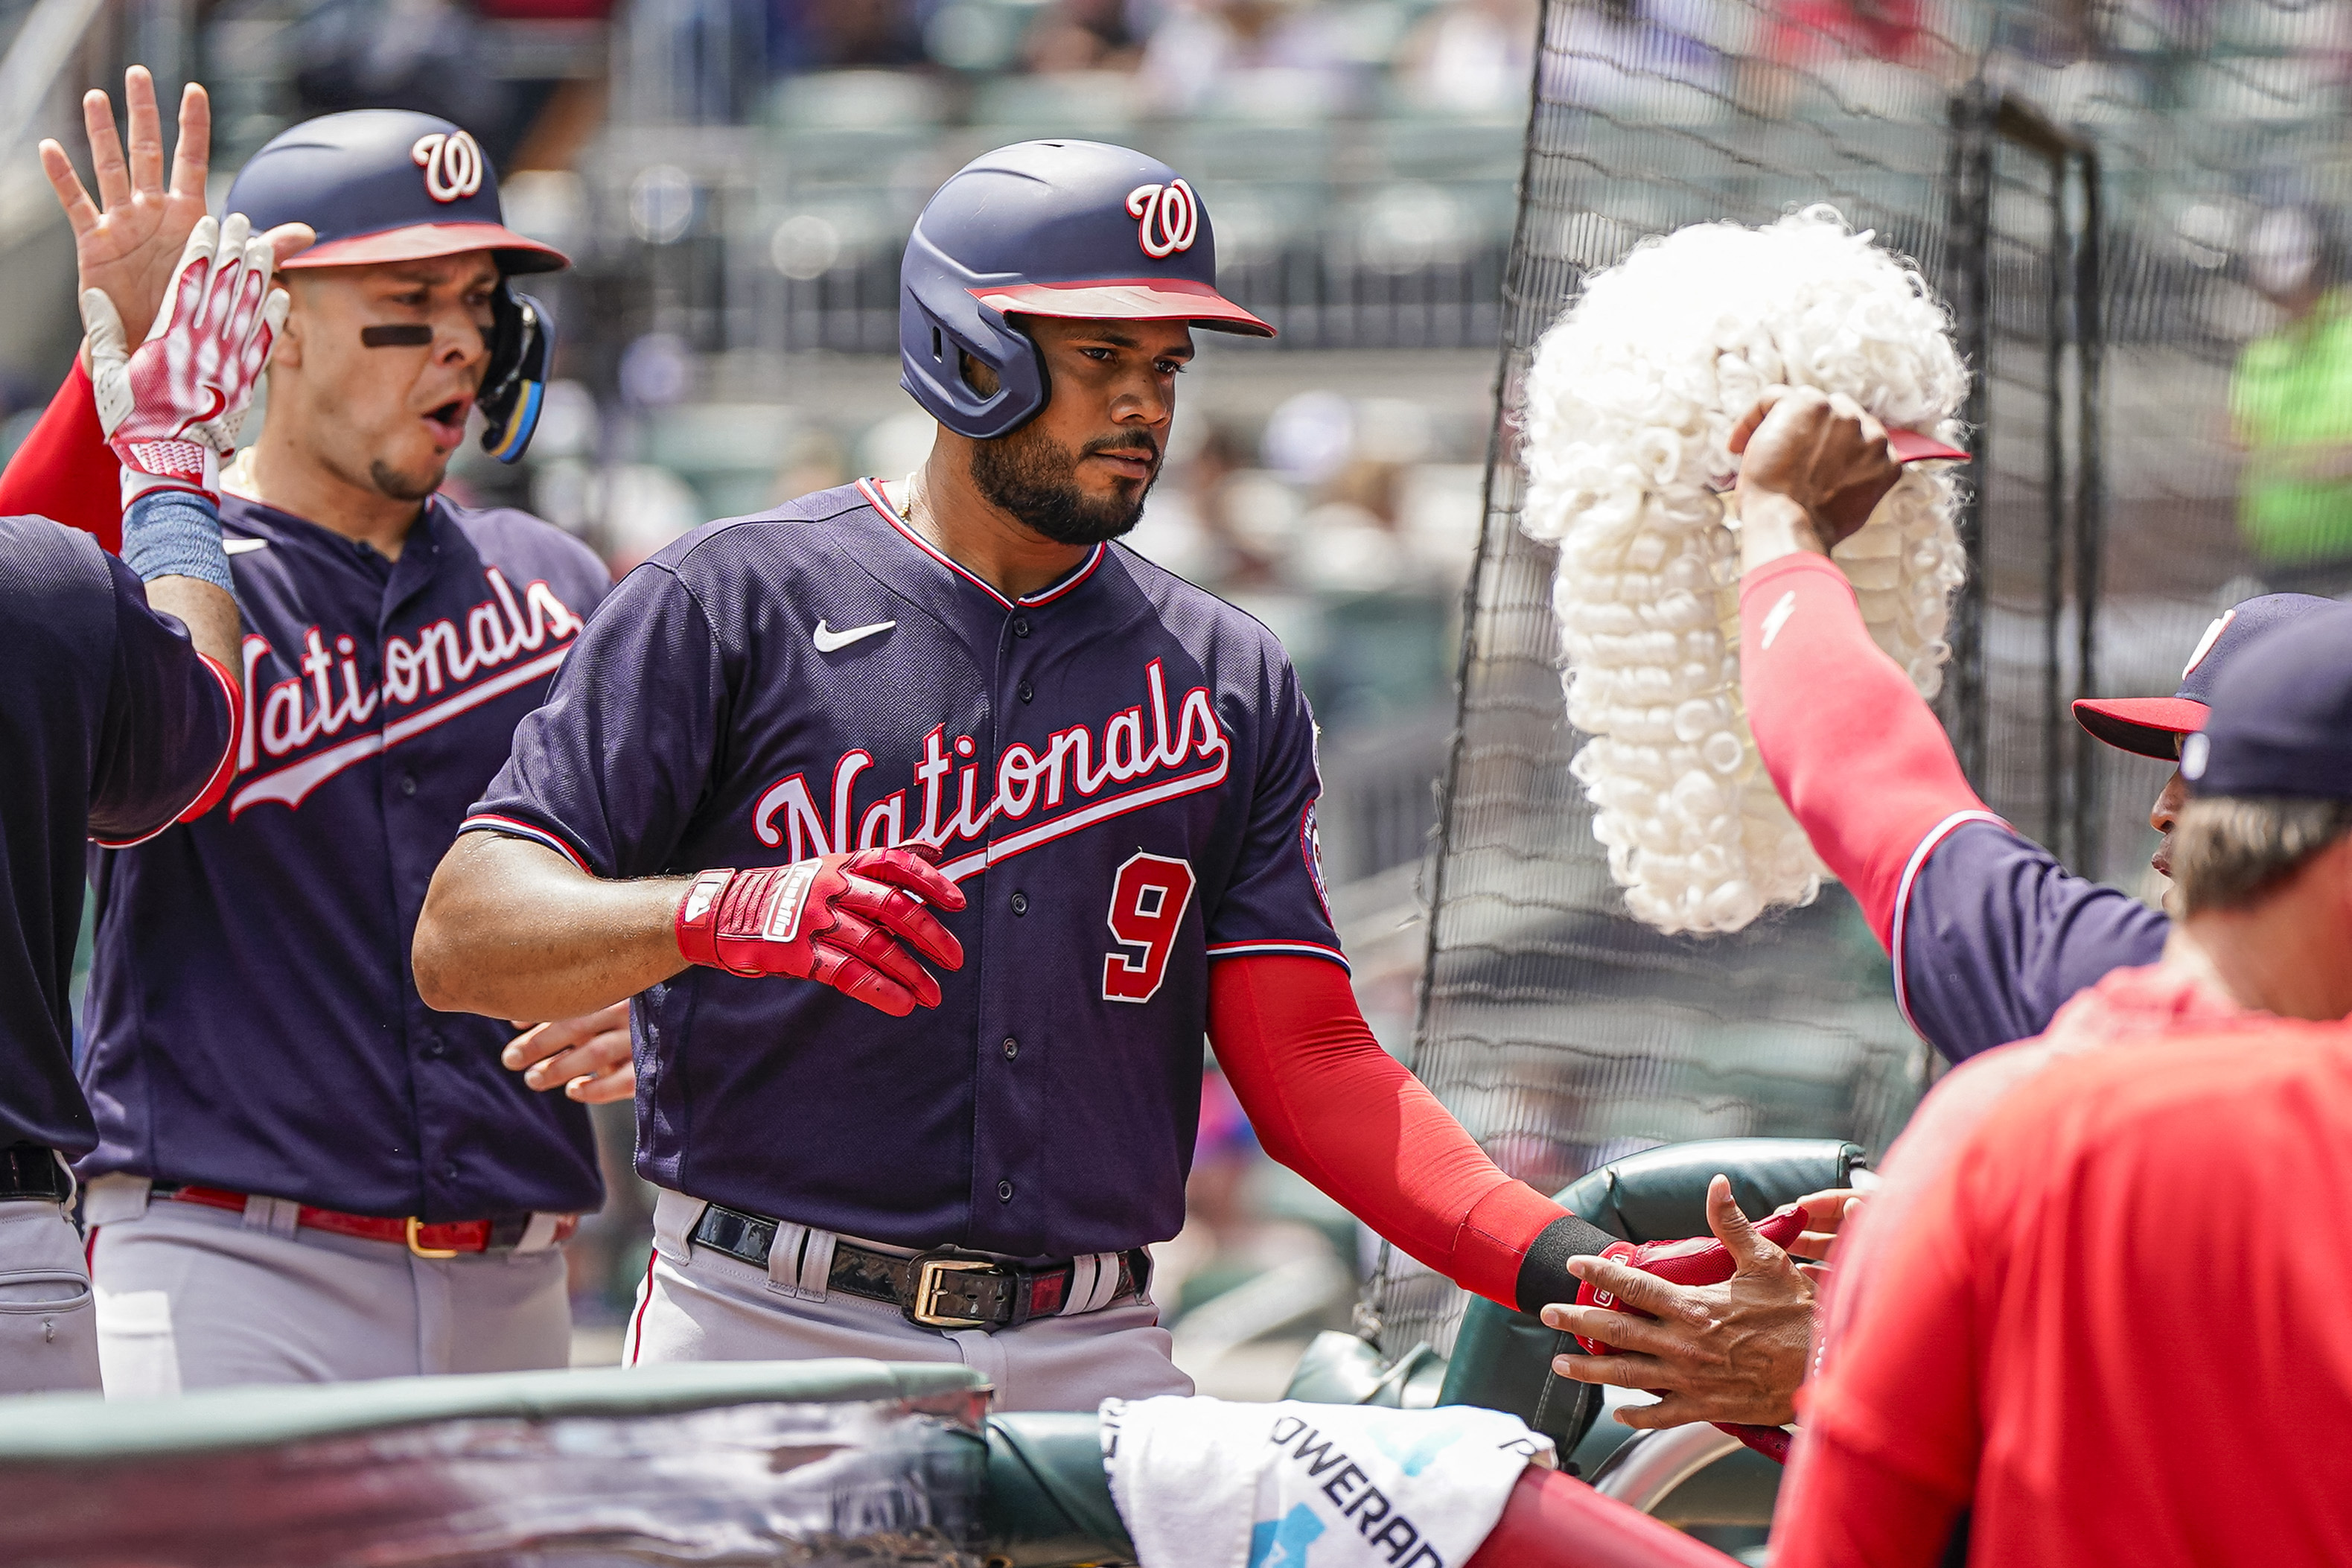 Dominic Smith, Jeimer Candelario homer as Nationals win 6-2 to stop 6-game  skid, Braves' win streak - Washington Times